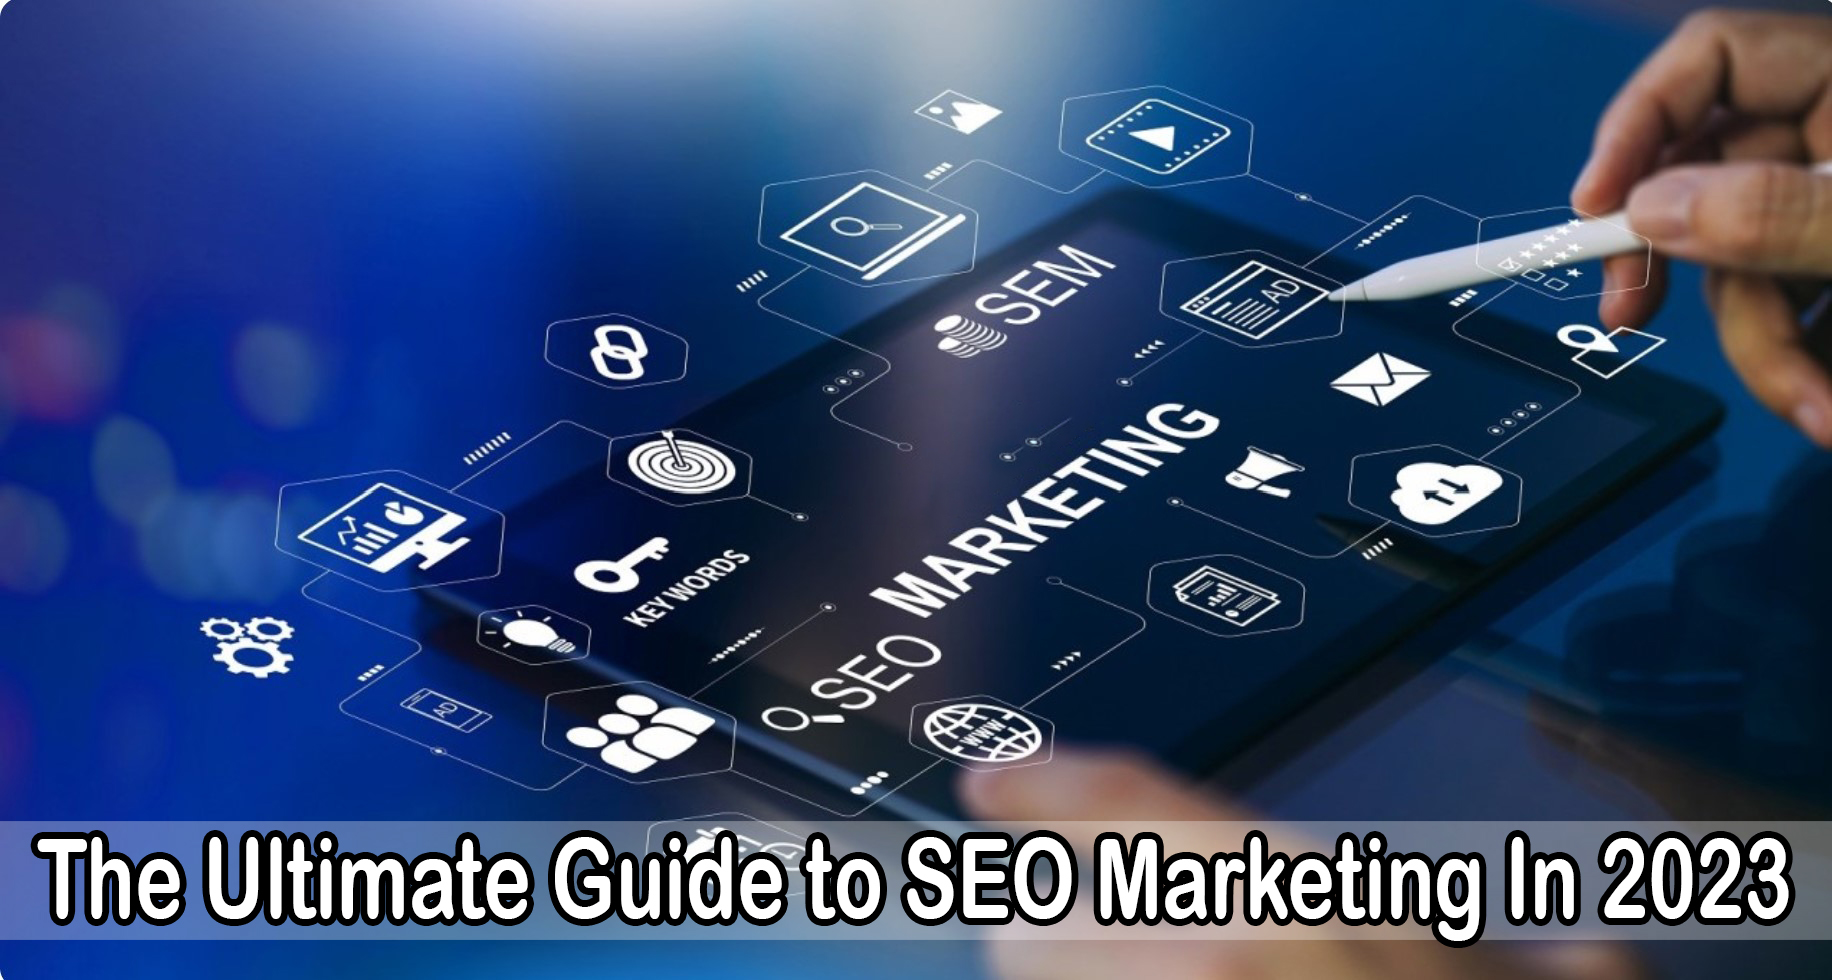 The Ultimate Guide to SEO Marketing In 2023